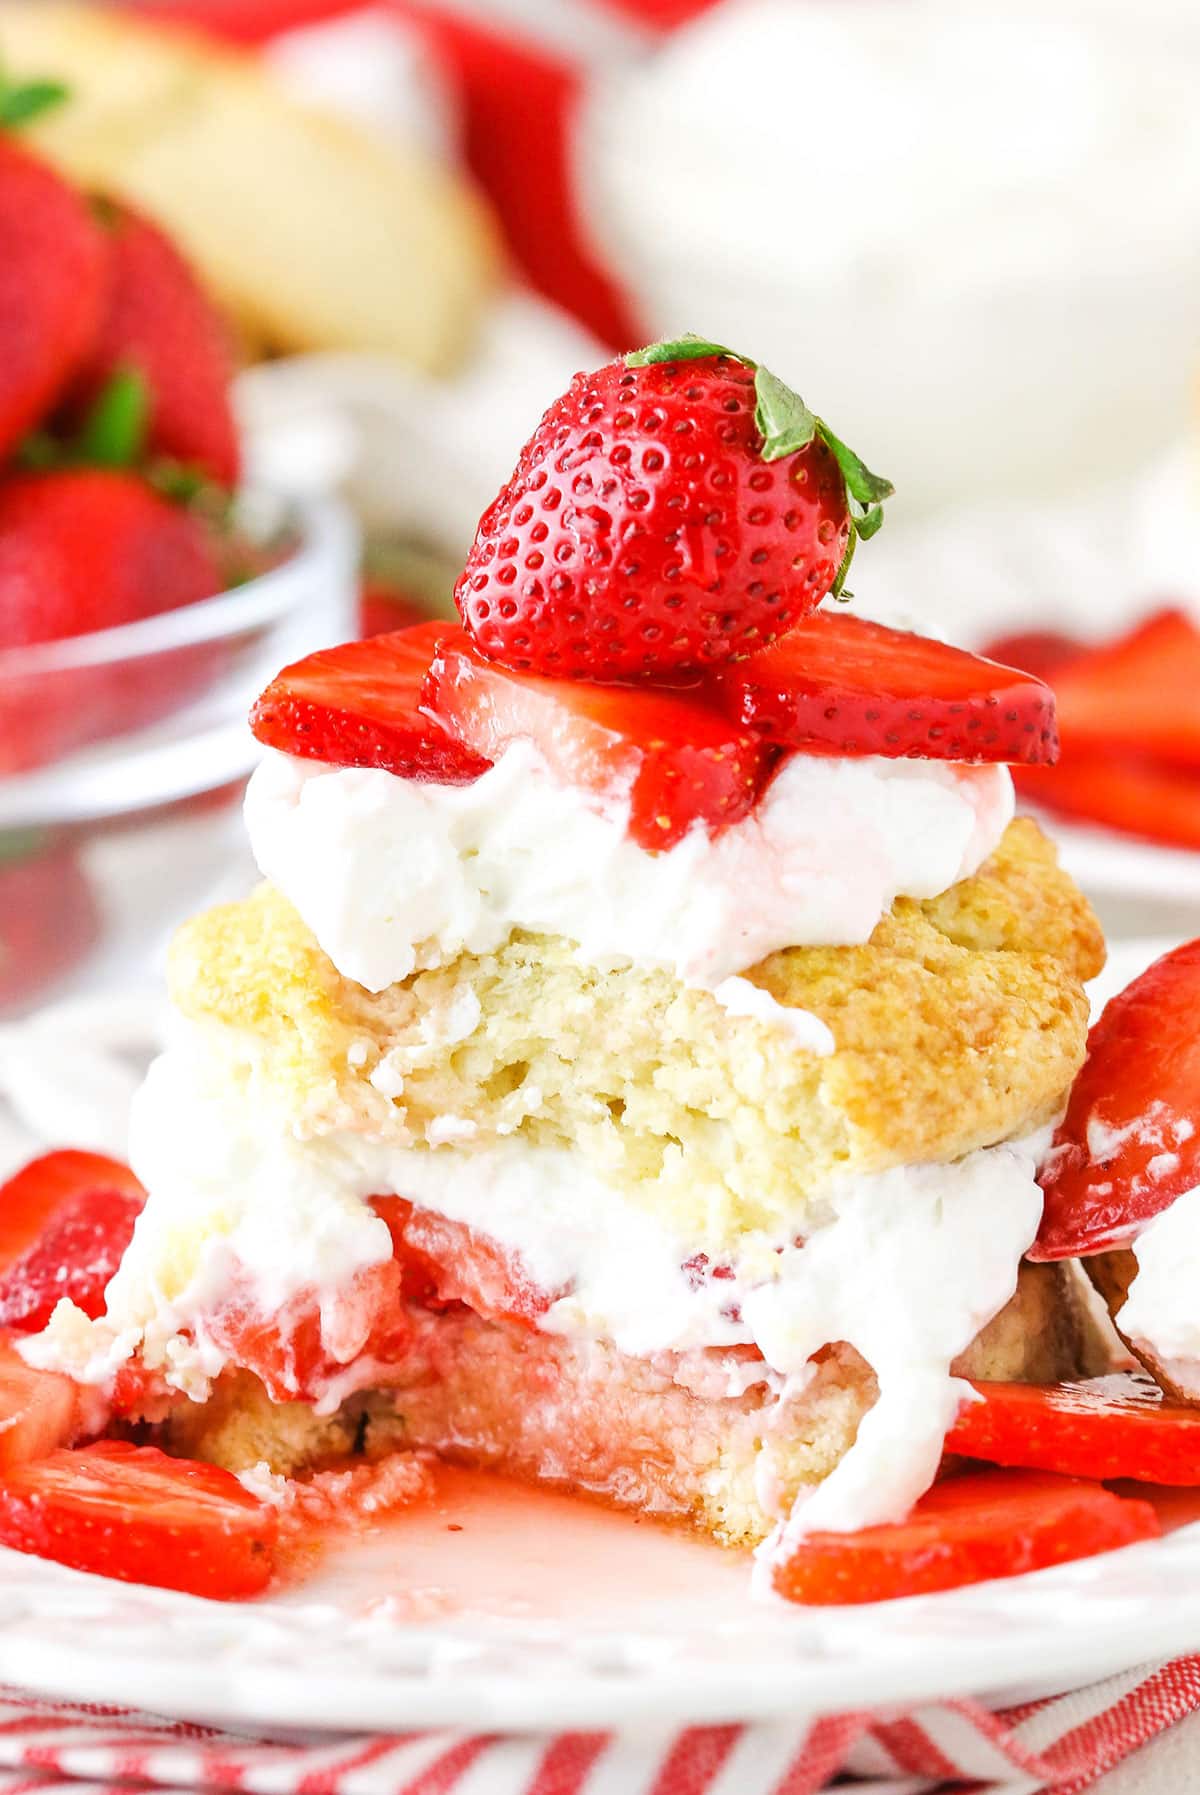 Strawberry shortcake with a bite taken out of it.